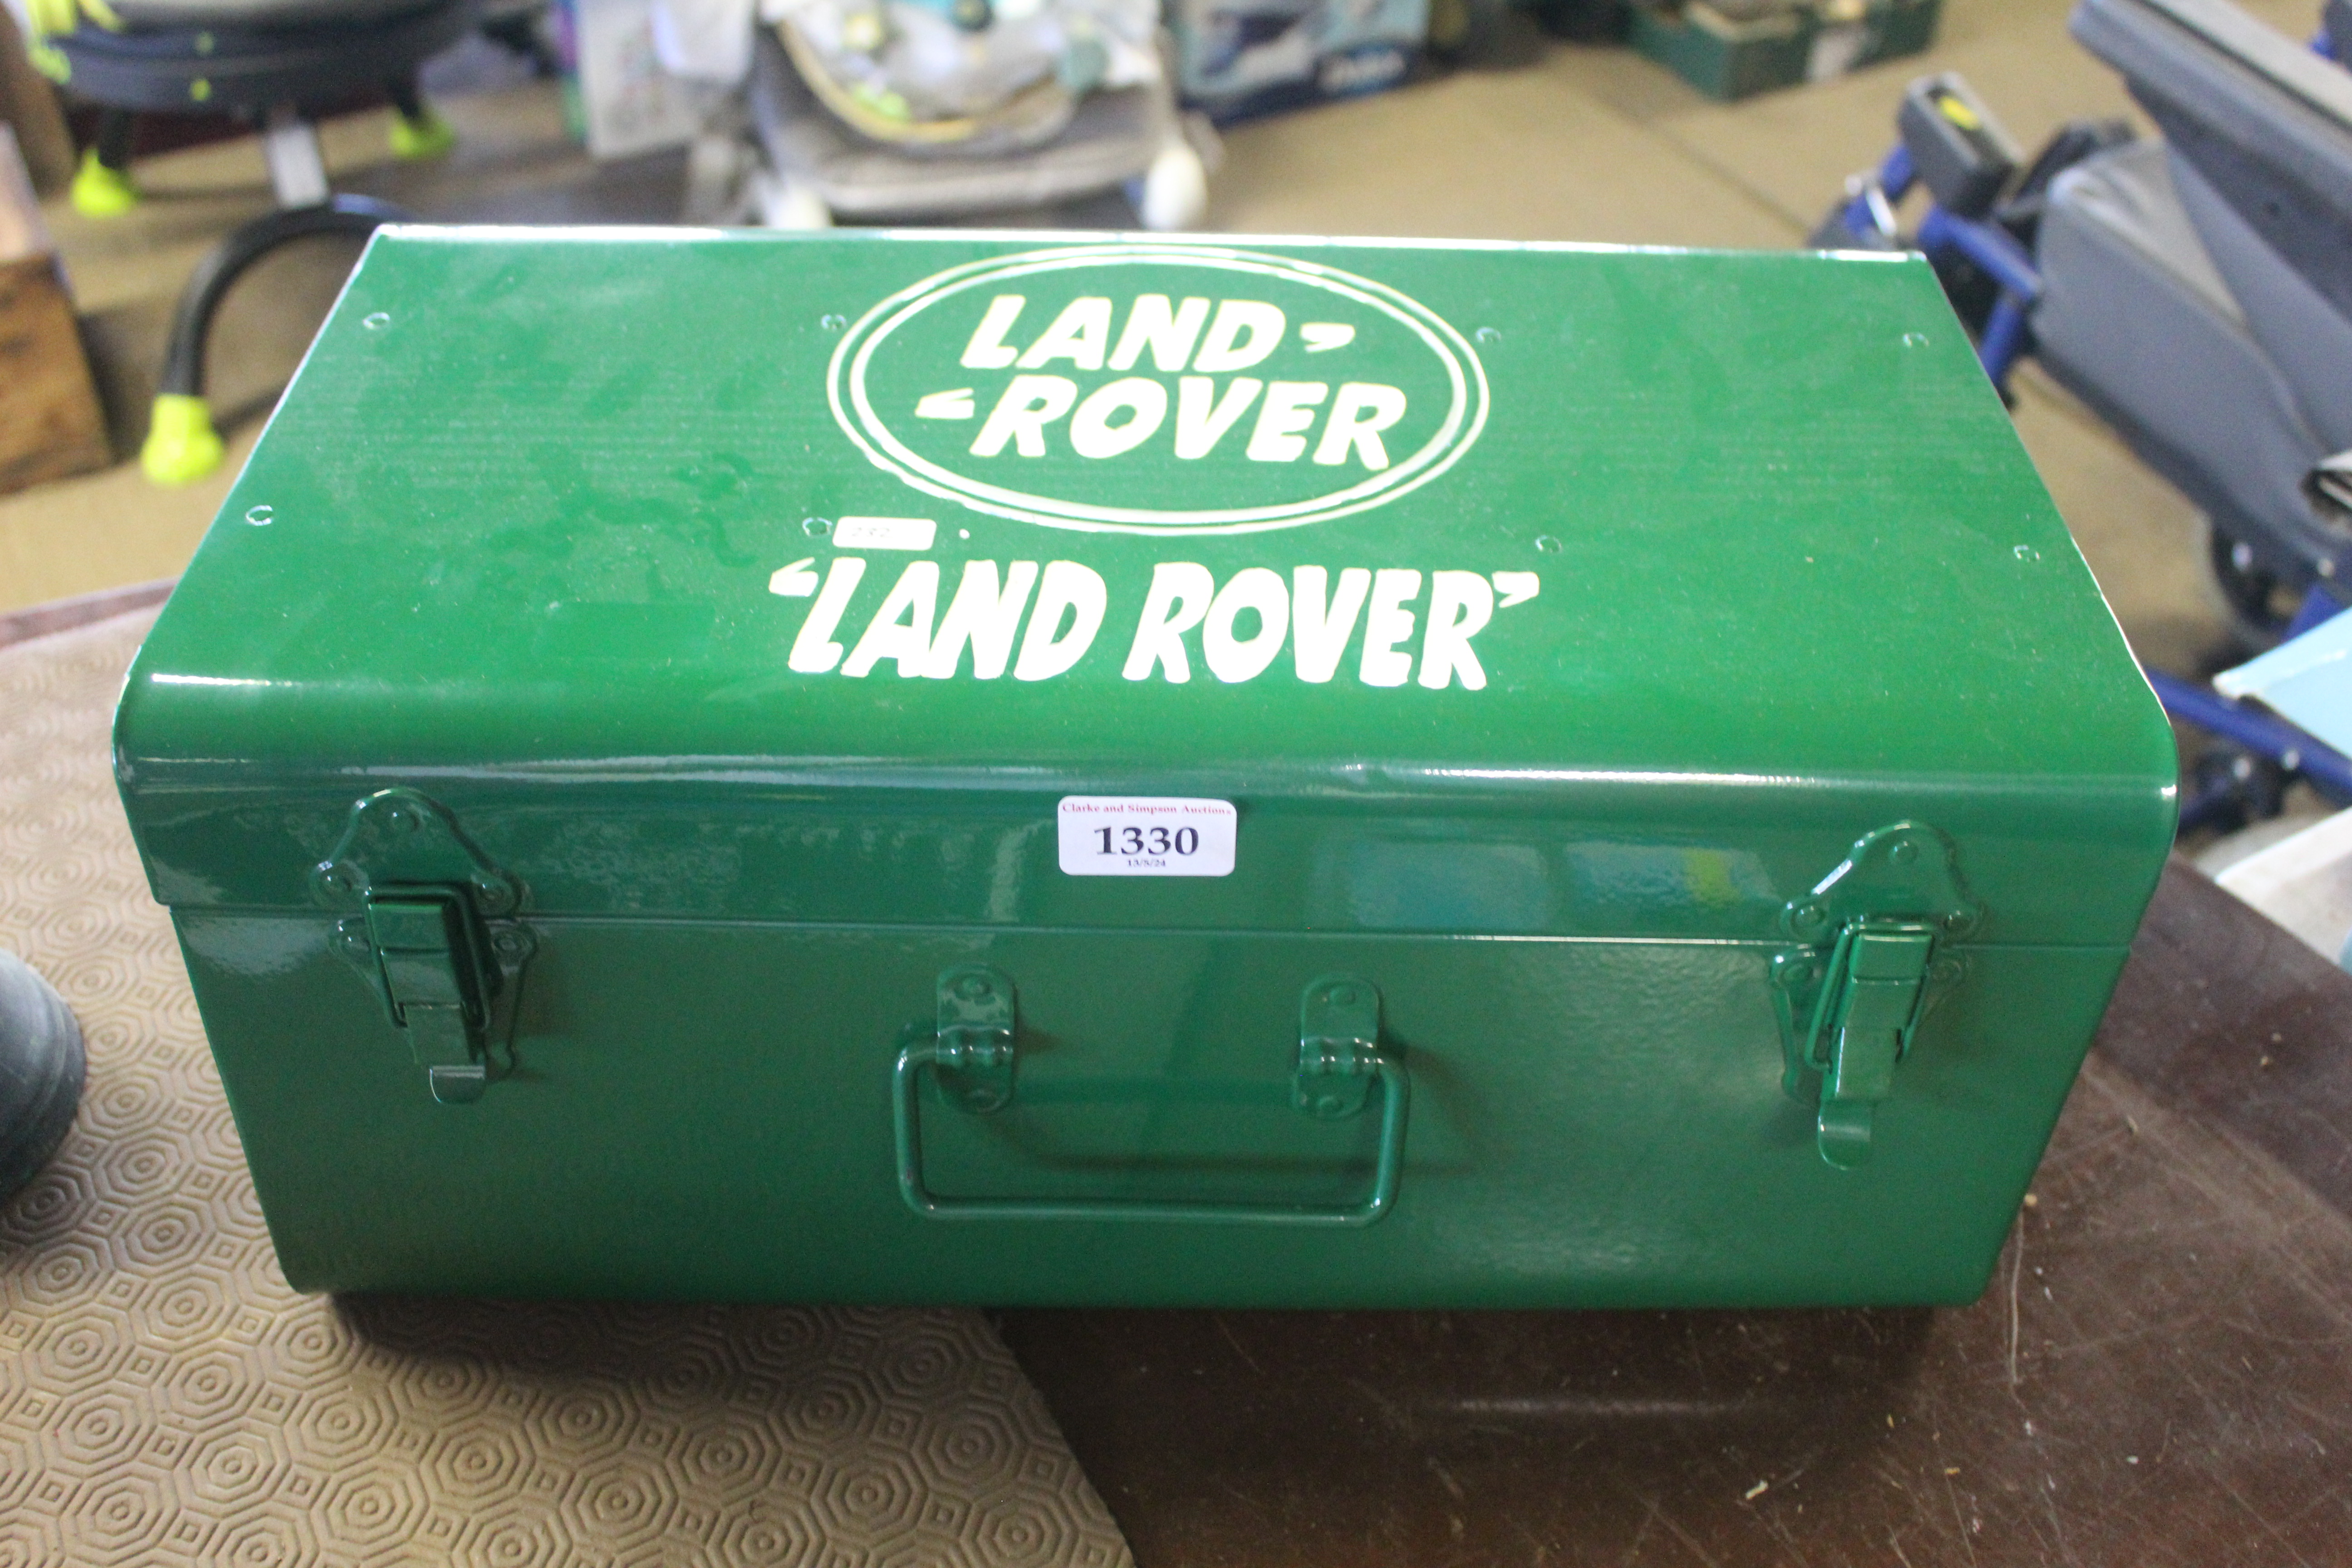 A metal tool box for "Land Rover" (232)